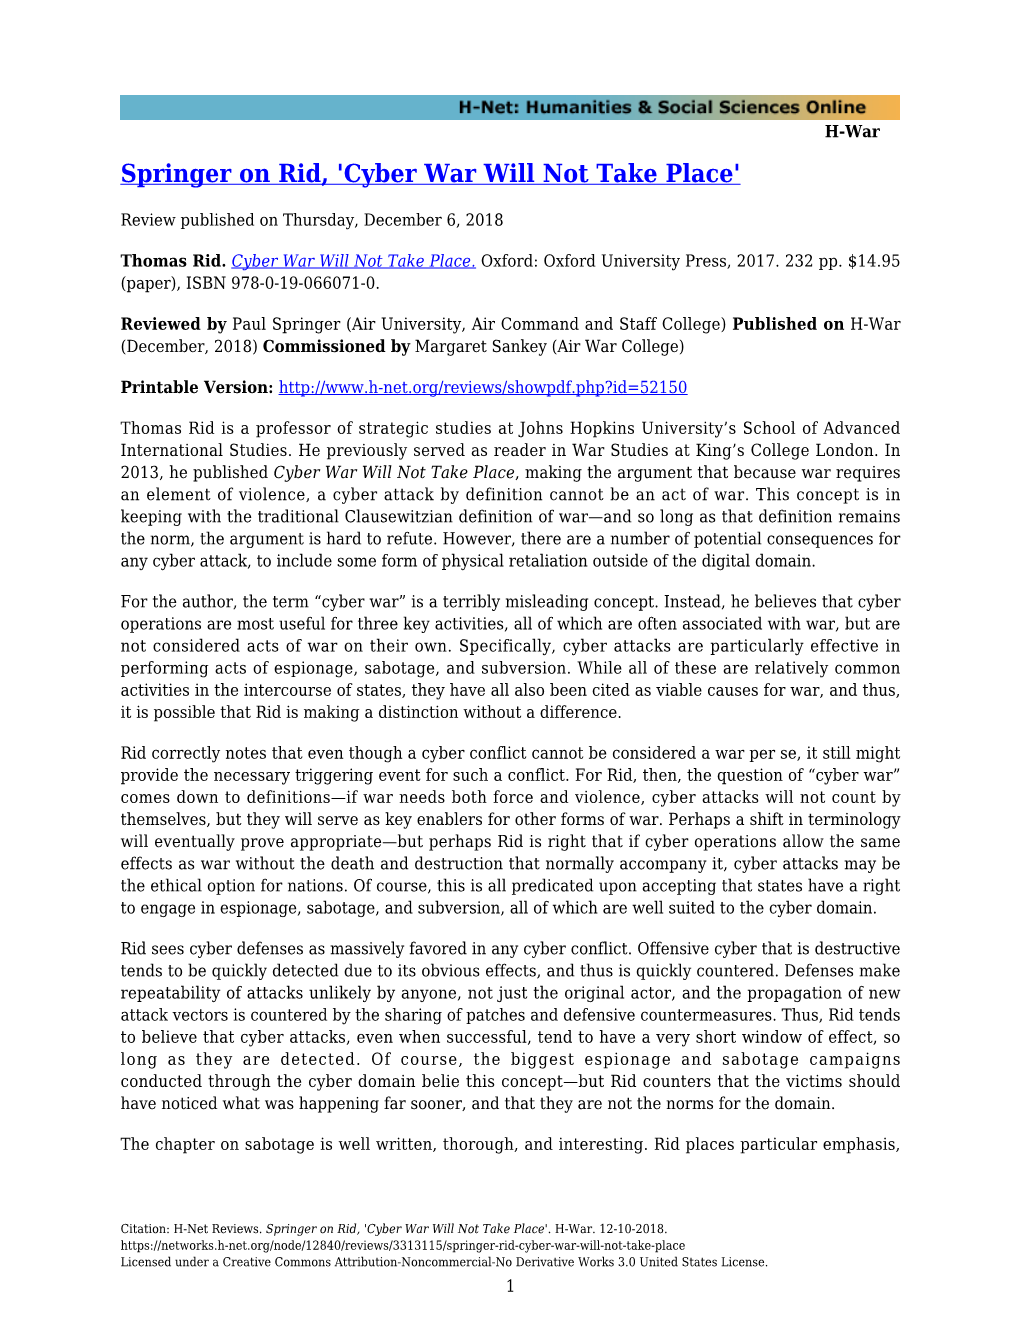 Springer on Rid, 'Cyber War Will Not Take Place'